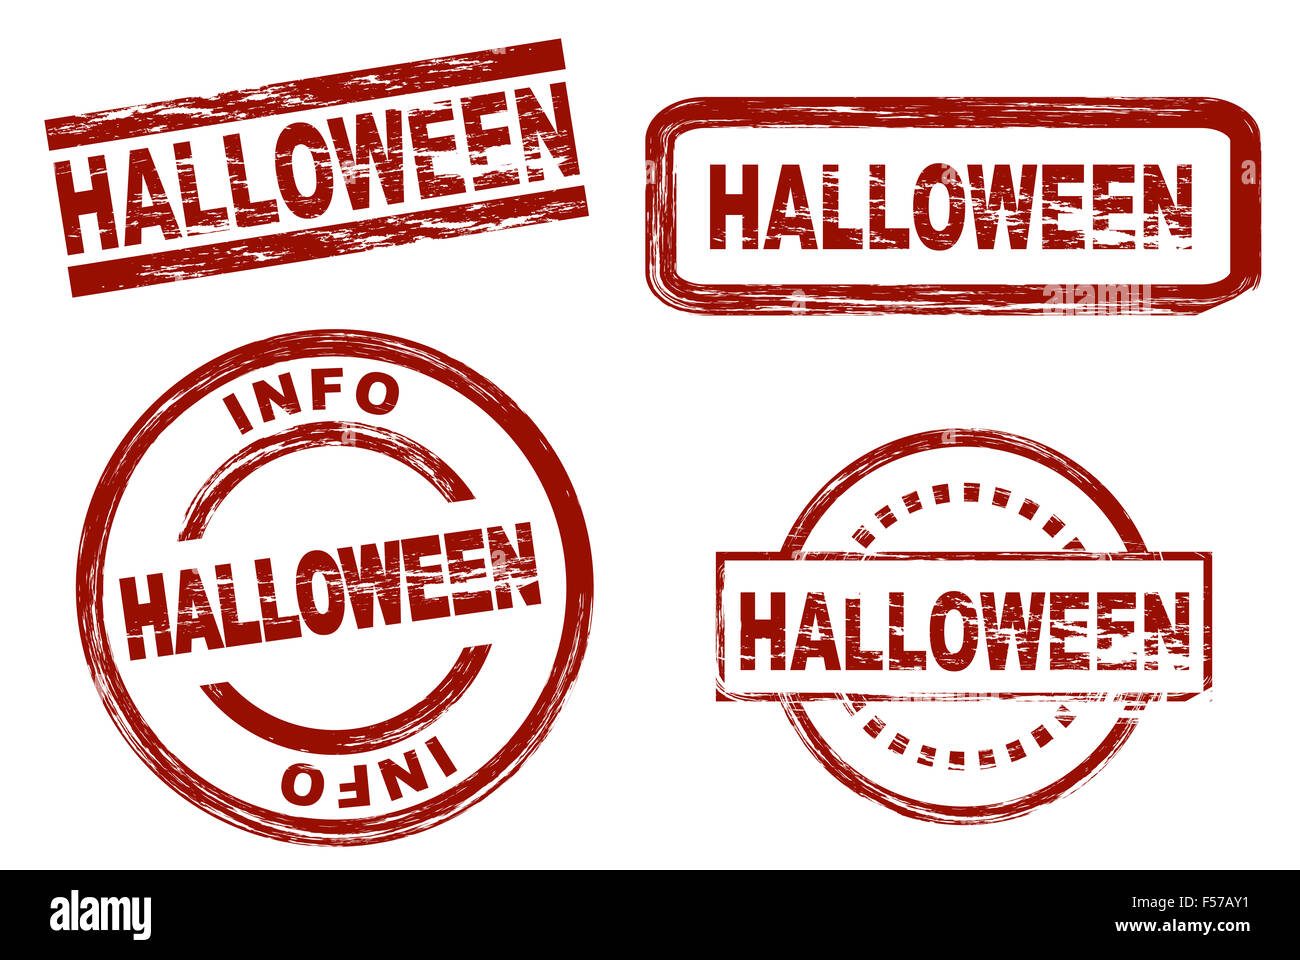 Set of stylized stamps showing the term Halloween. All on white background. Stock Photo